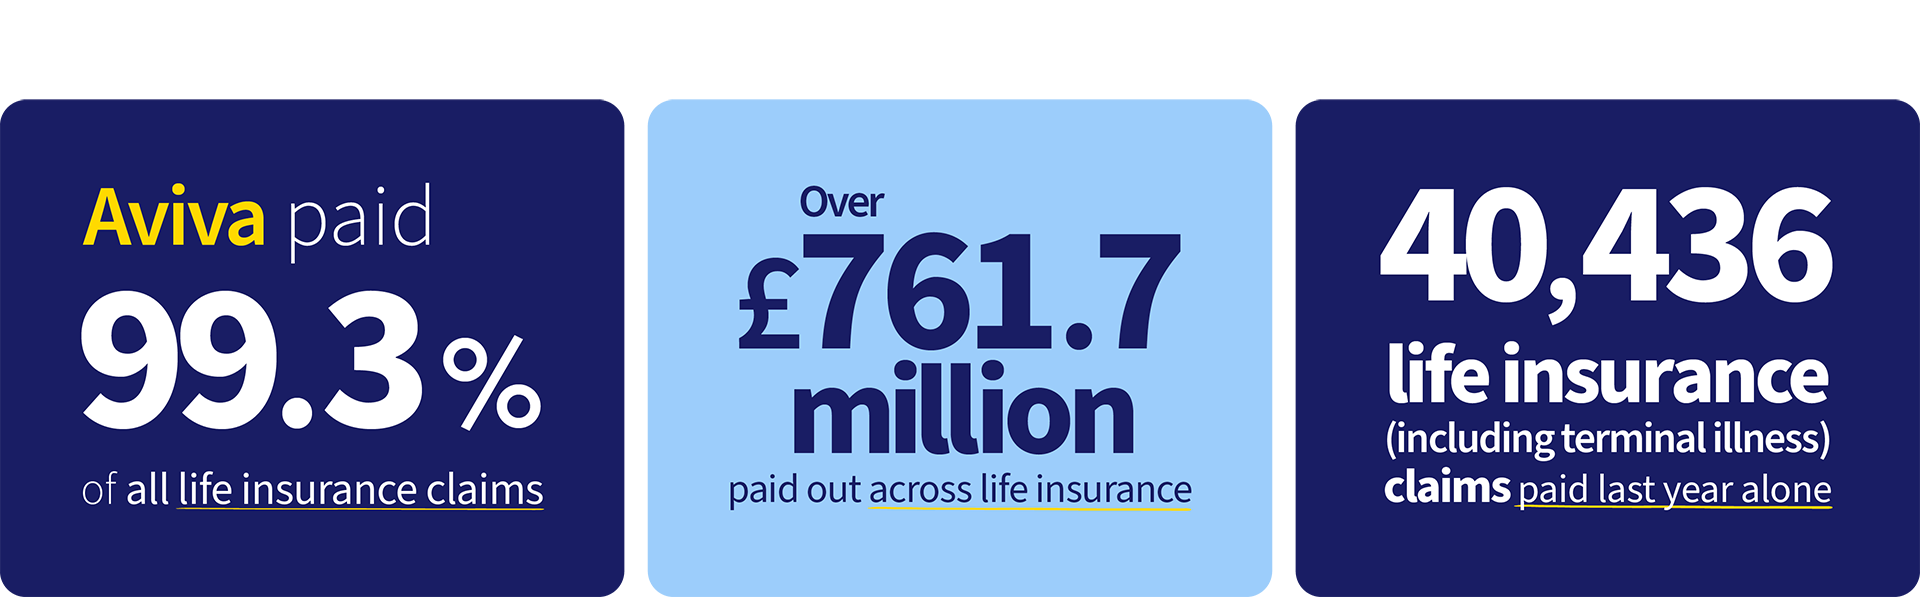 Aviva paid 99.3% of all life insurance claims (including over 50s) in 2023. Over £761.7 million paid out across life insurance (including over 50's) policies in 2023. 40,436 life insurance (including over 50s) claims paid last year alone